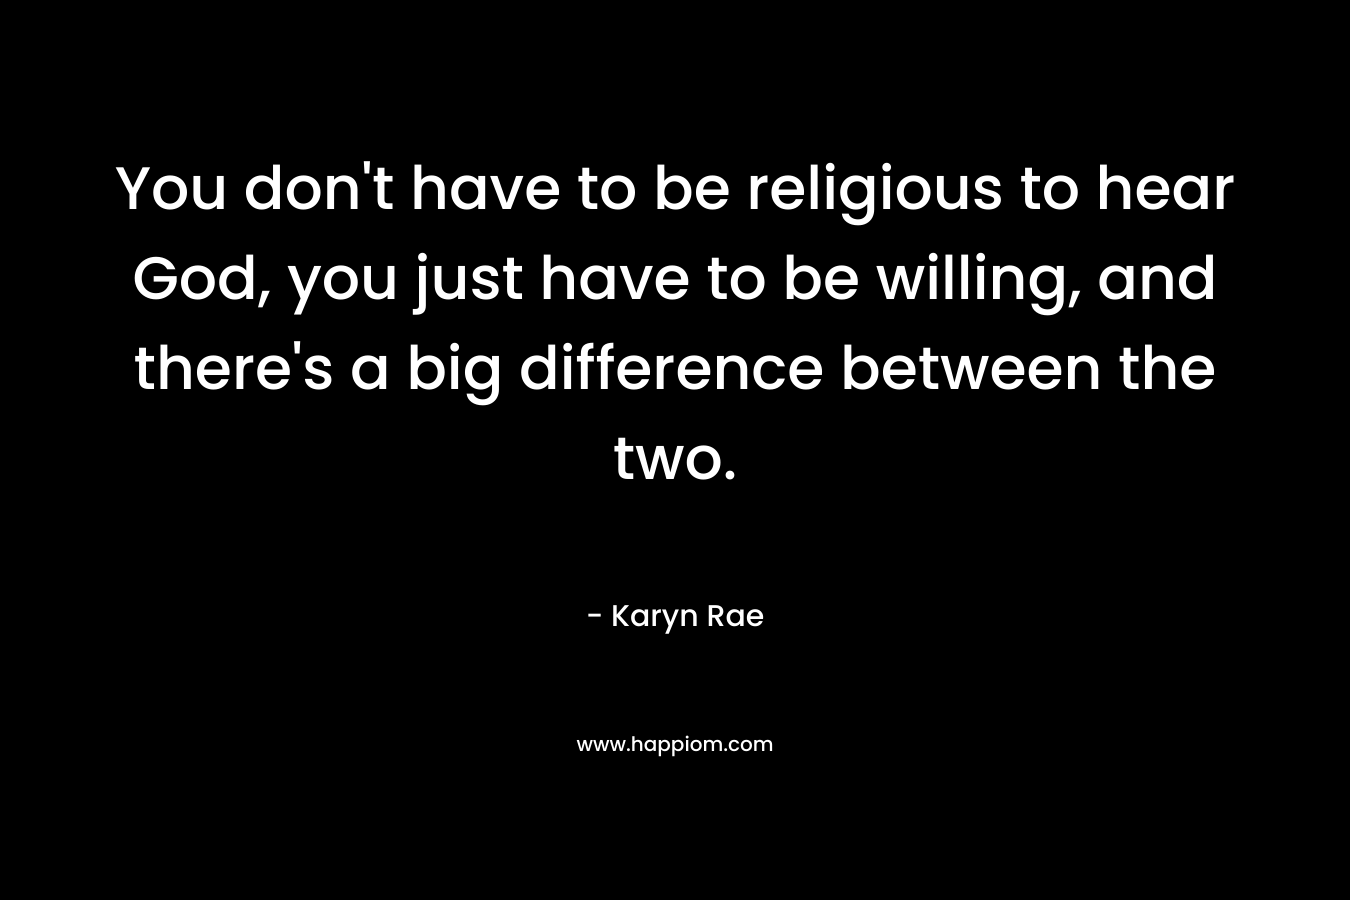 You don't have to be religious to hear God, you just have to be willing, and there's a big difference between the two.